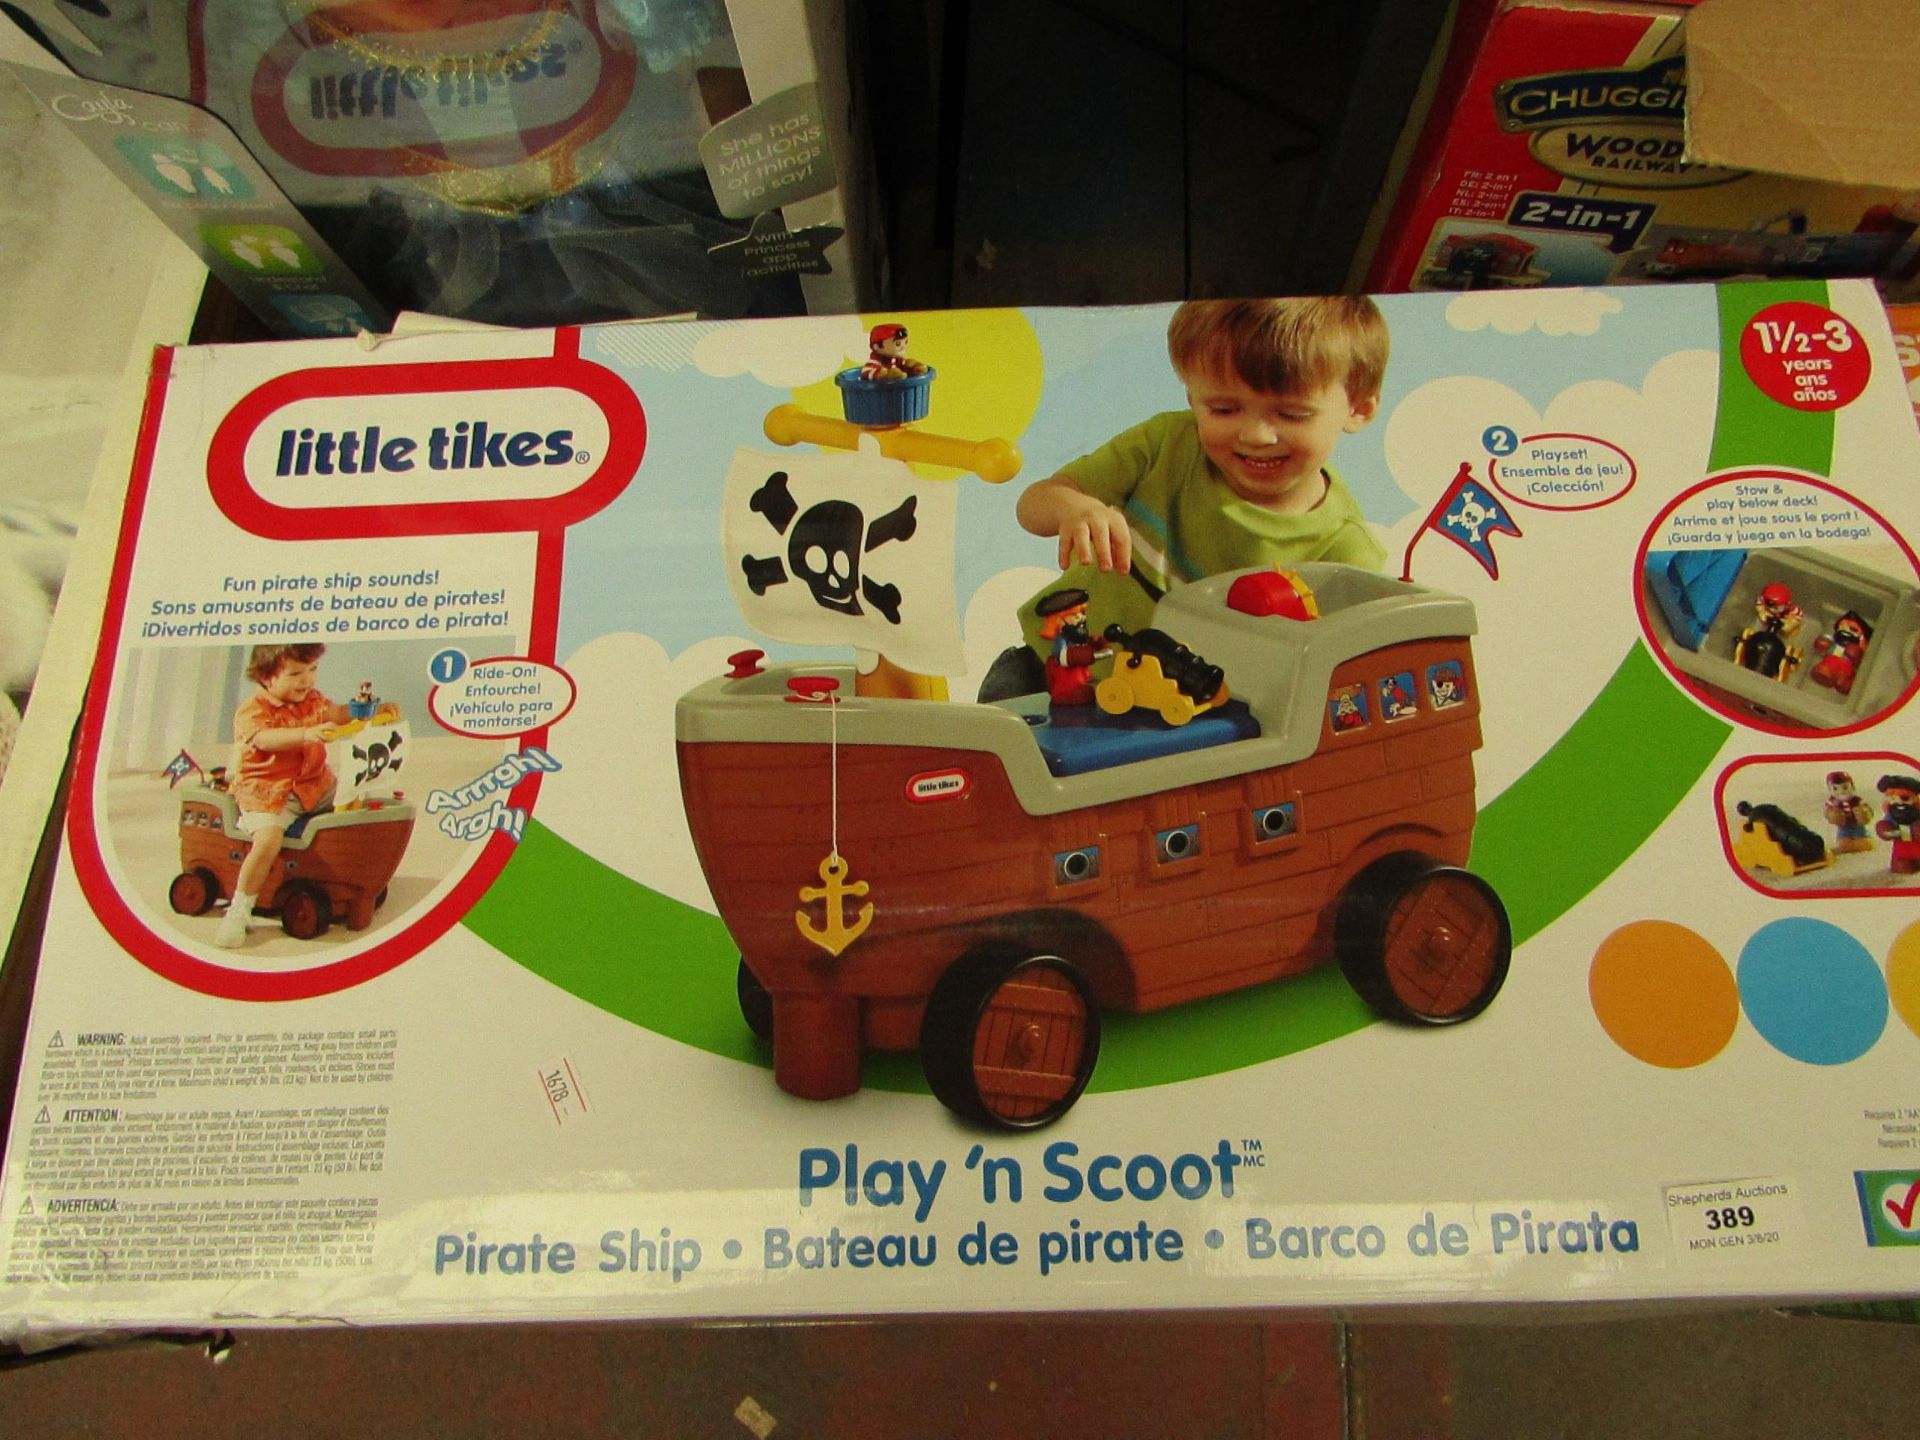 Little tikes Play n Scoot Pirate Ship. Boxed but unchecked